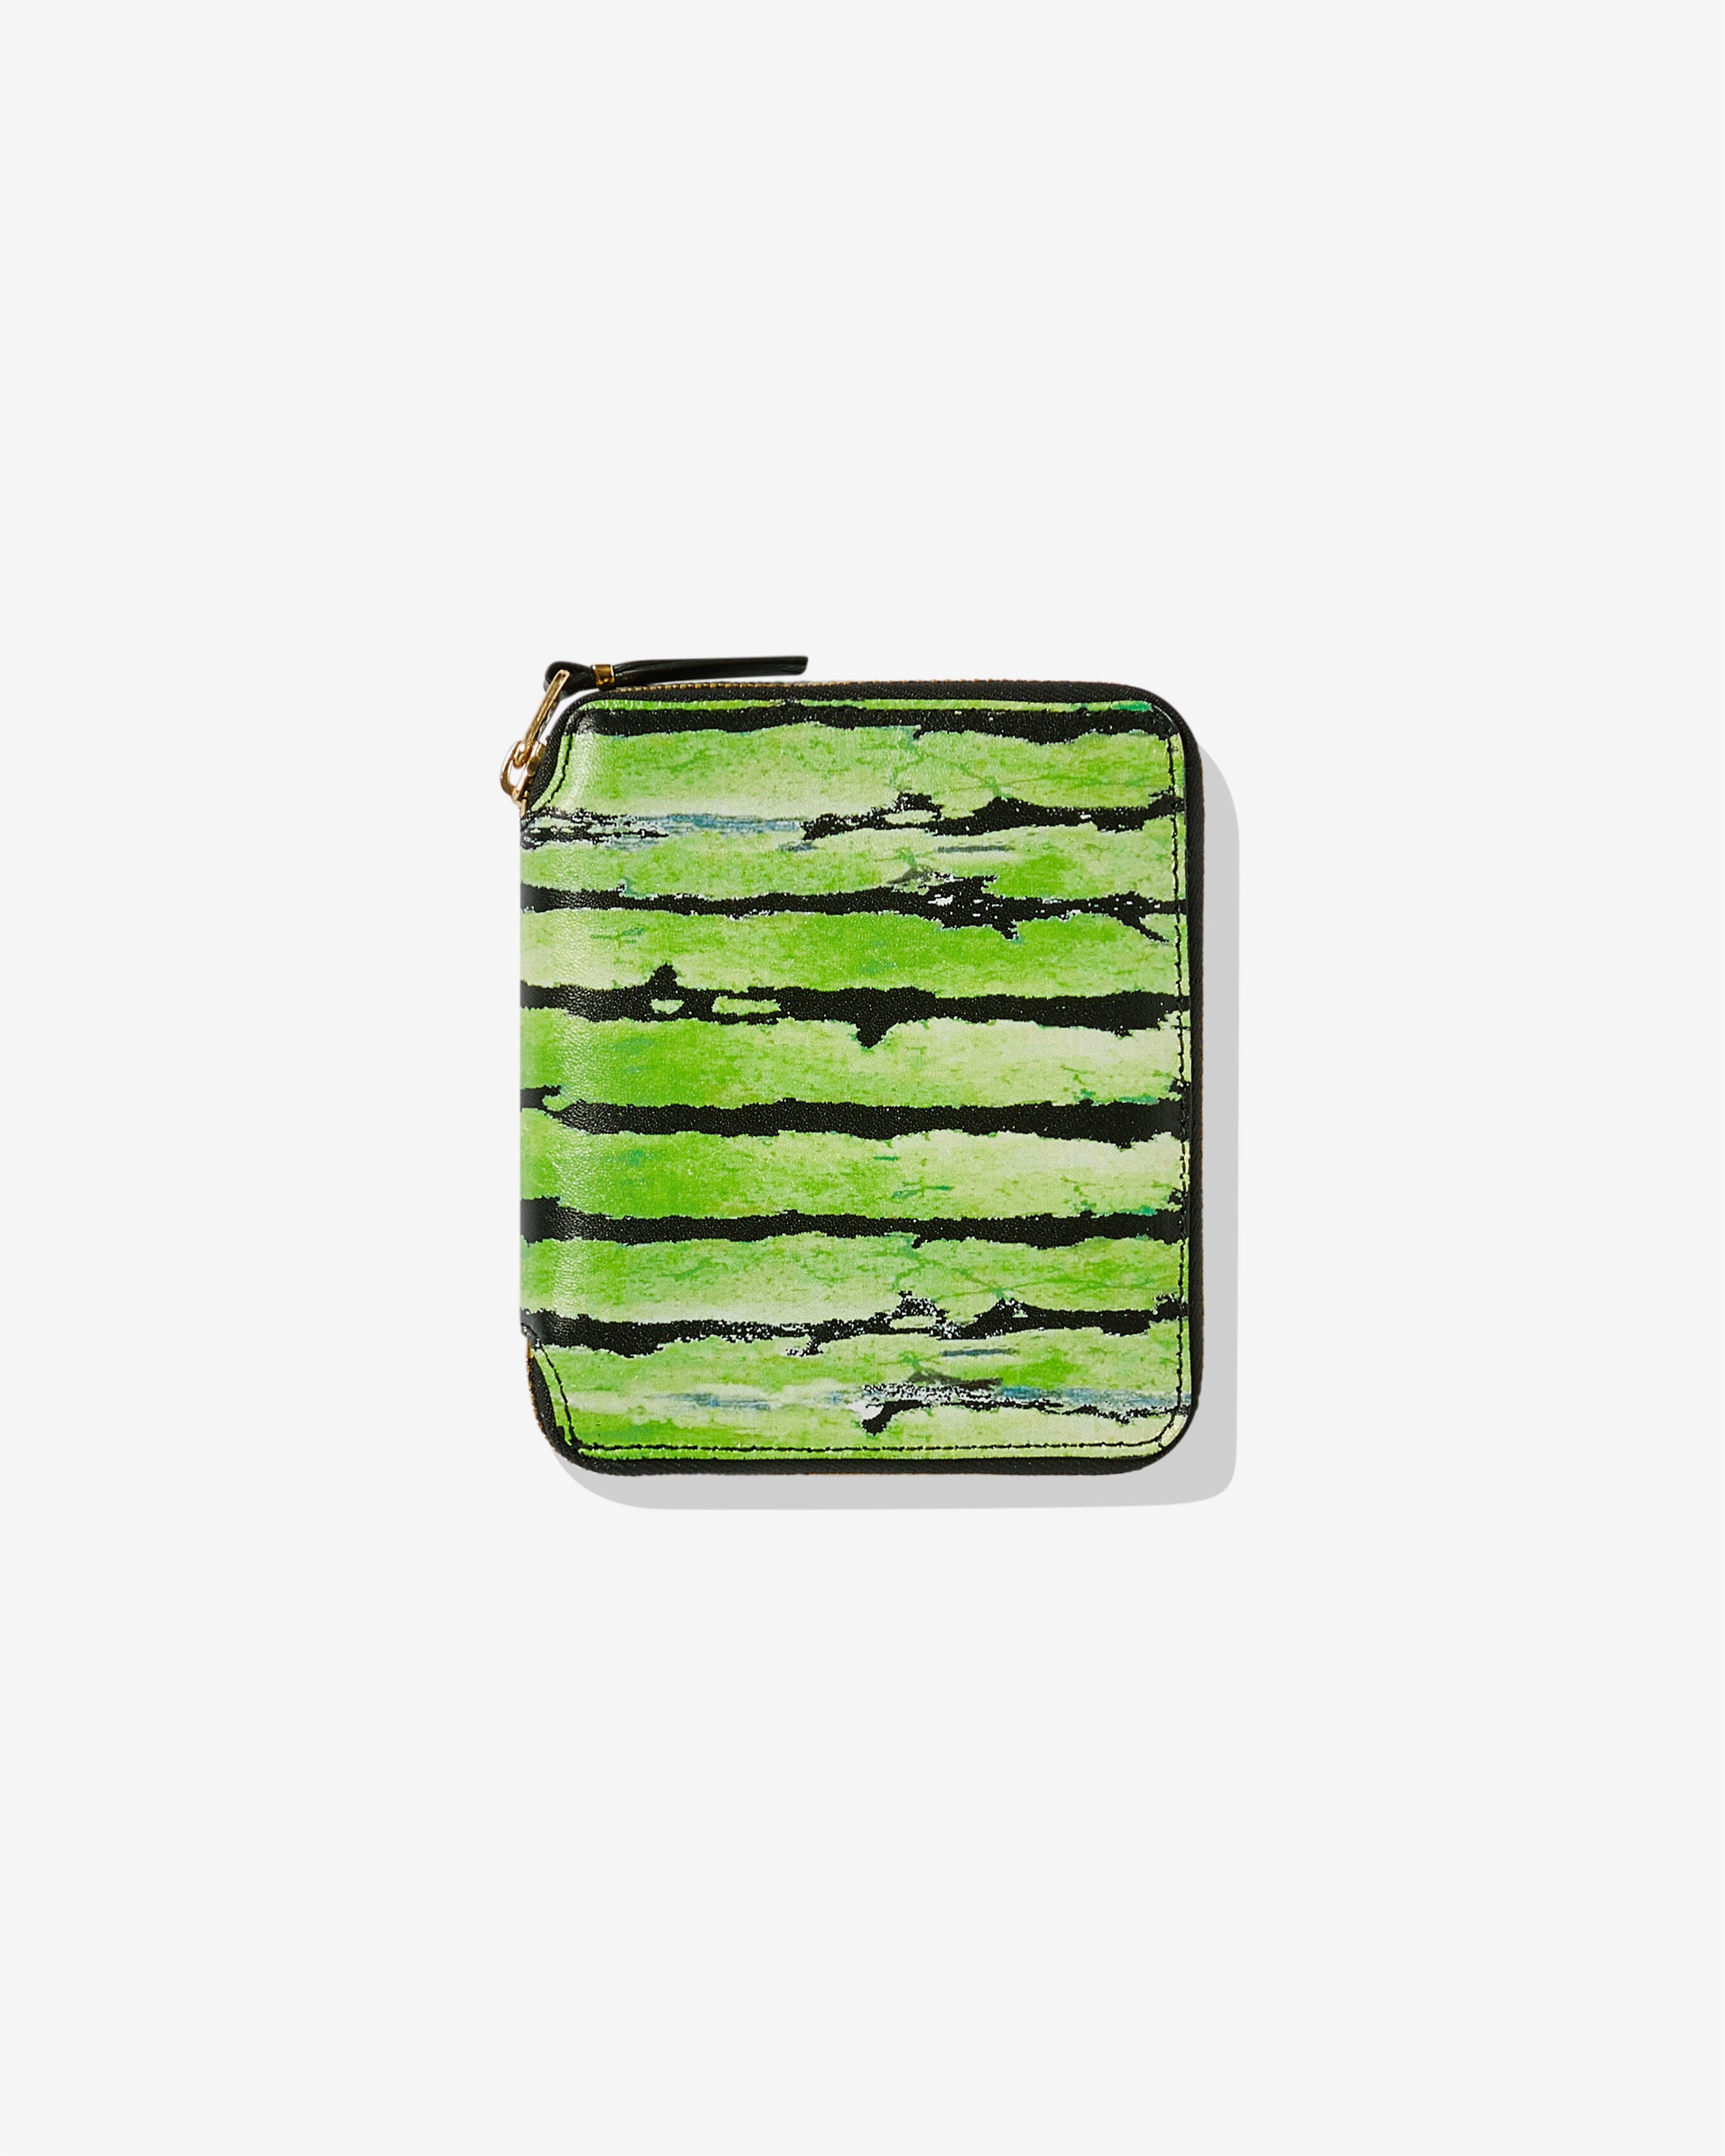 Denim Tears - CDG Watermelon Full Zip Around Wallet - (Green) SA2100 by COMME DES GARCONS